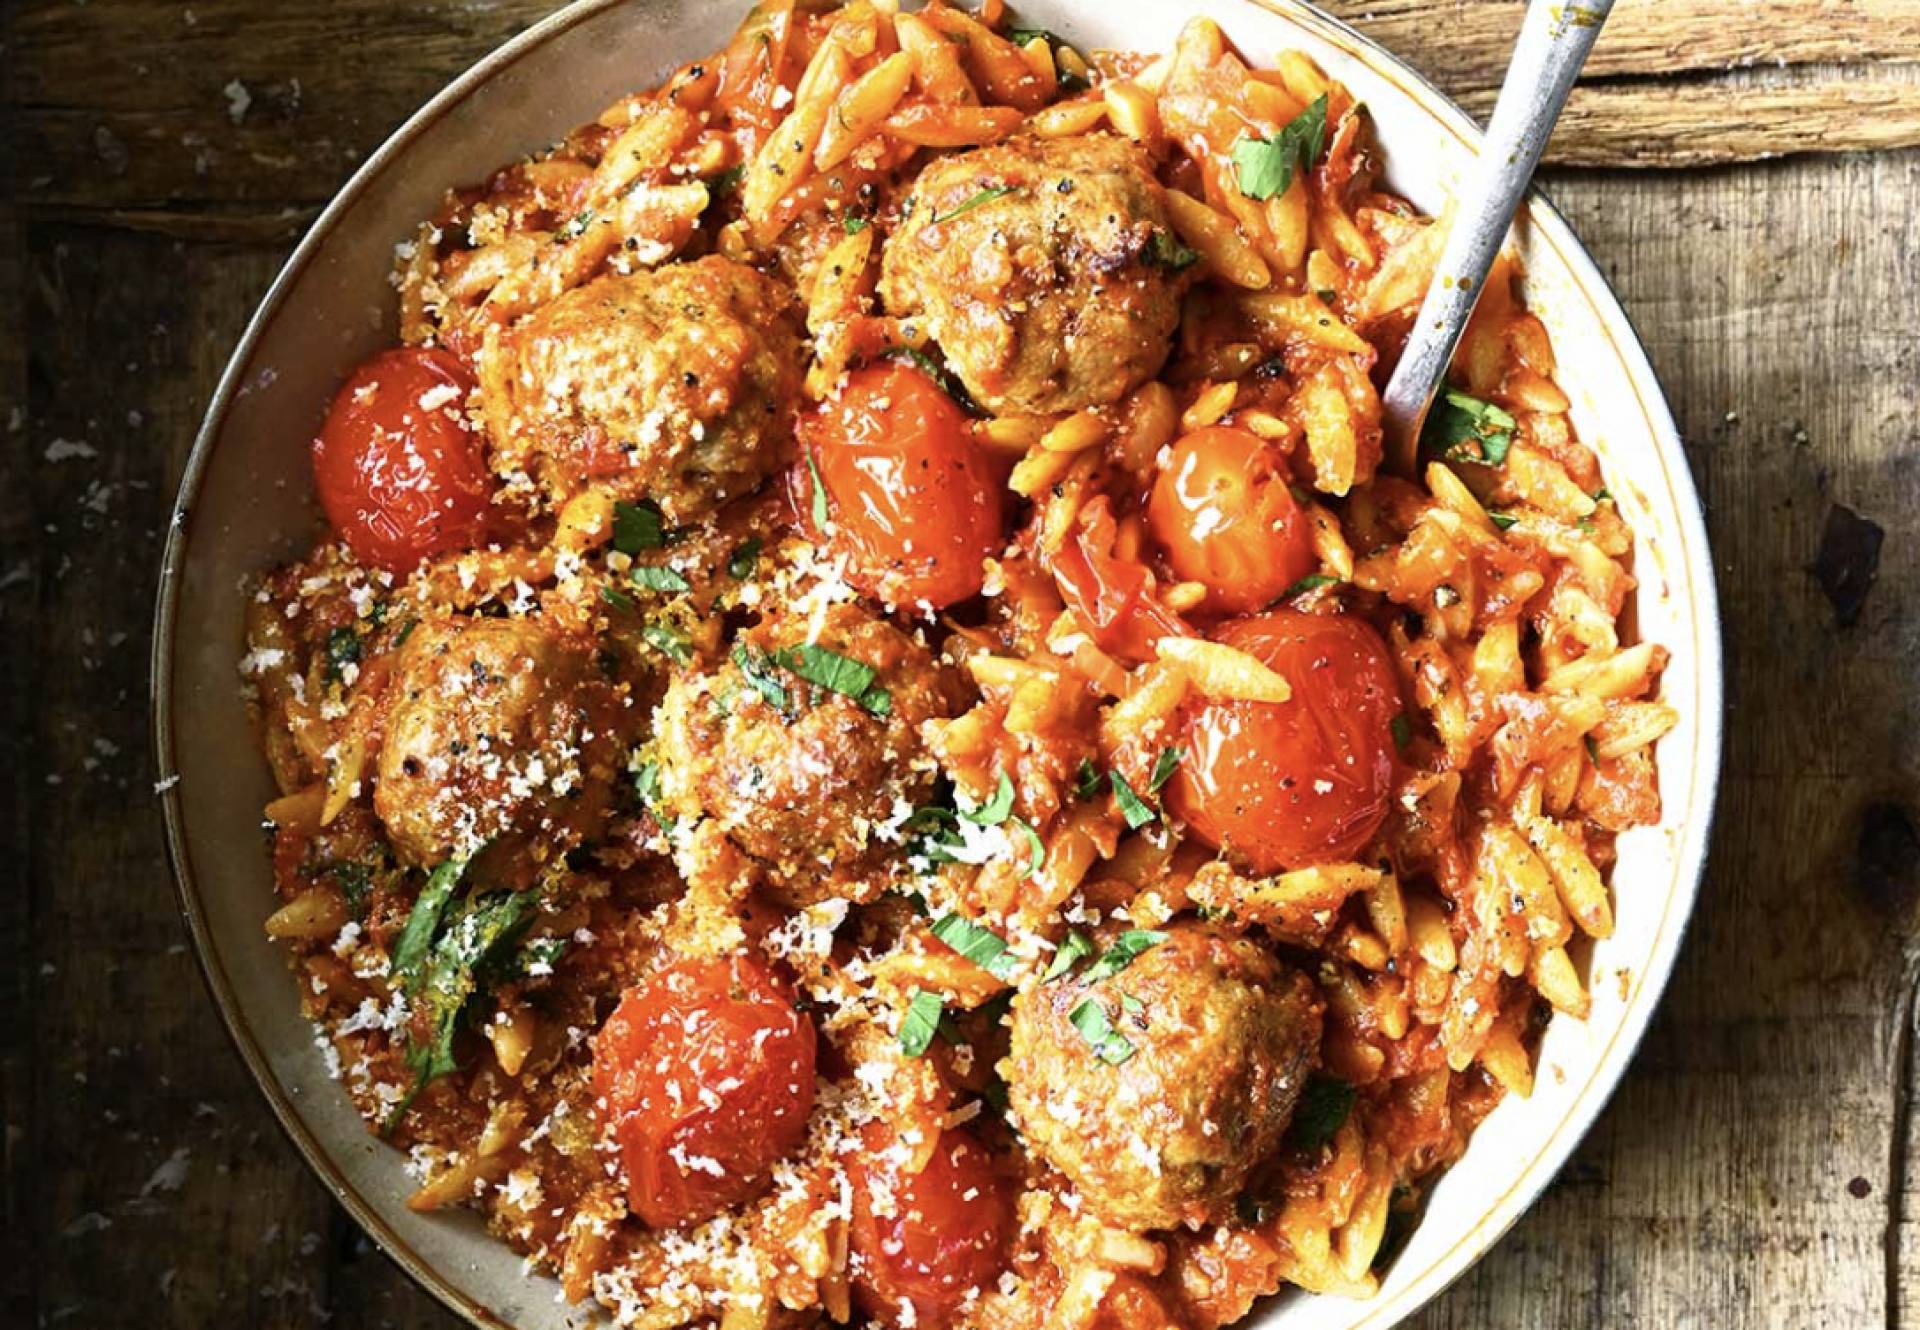 Providence Cattle Co. Grass Fed Meatballs over Organic Orzo Pasta with Marinara and Basil